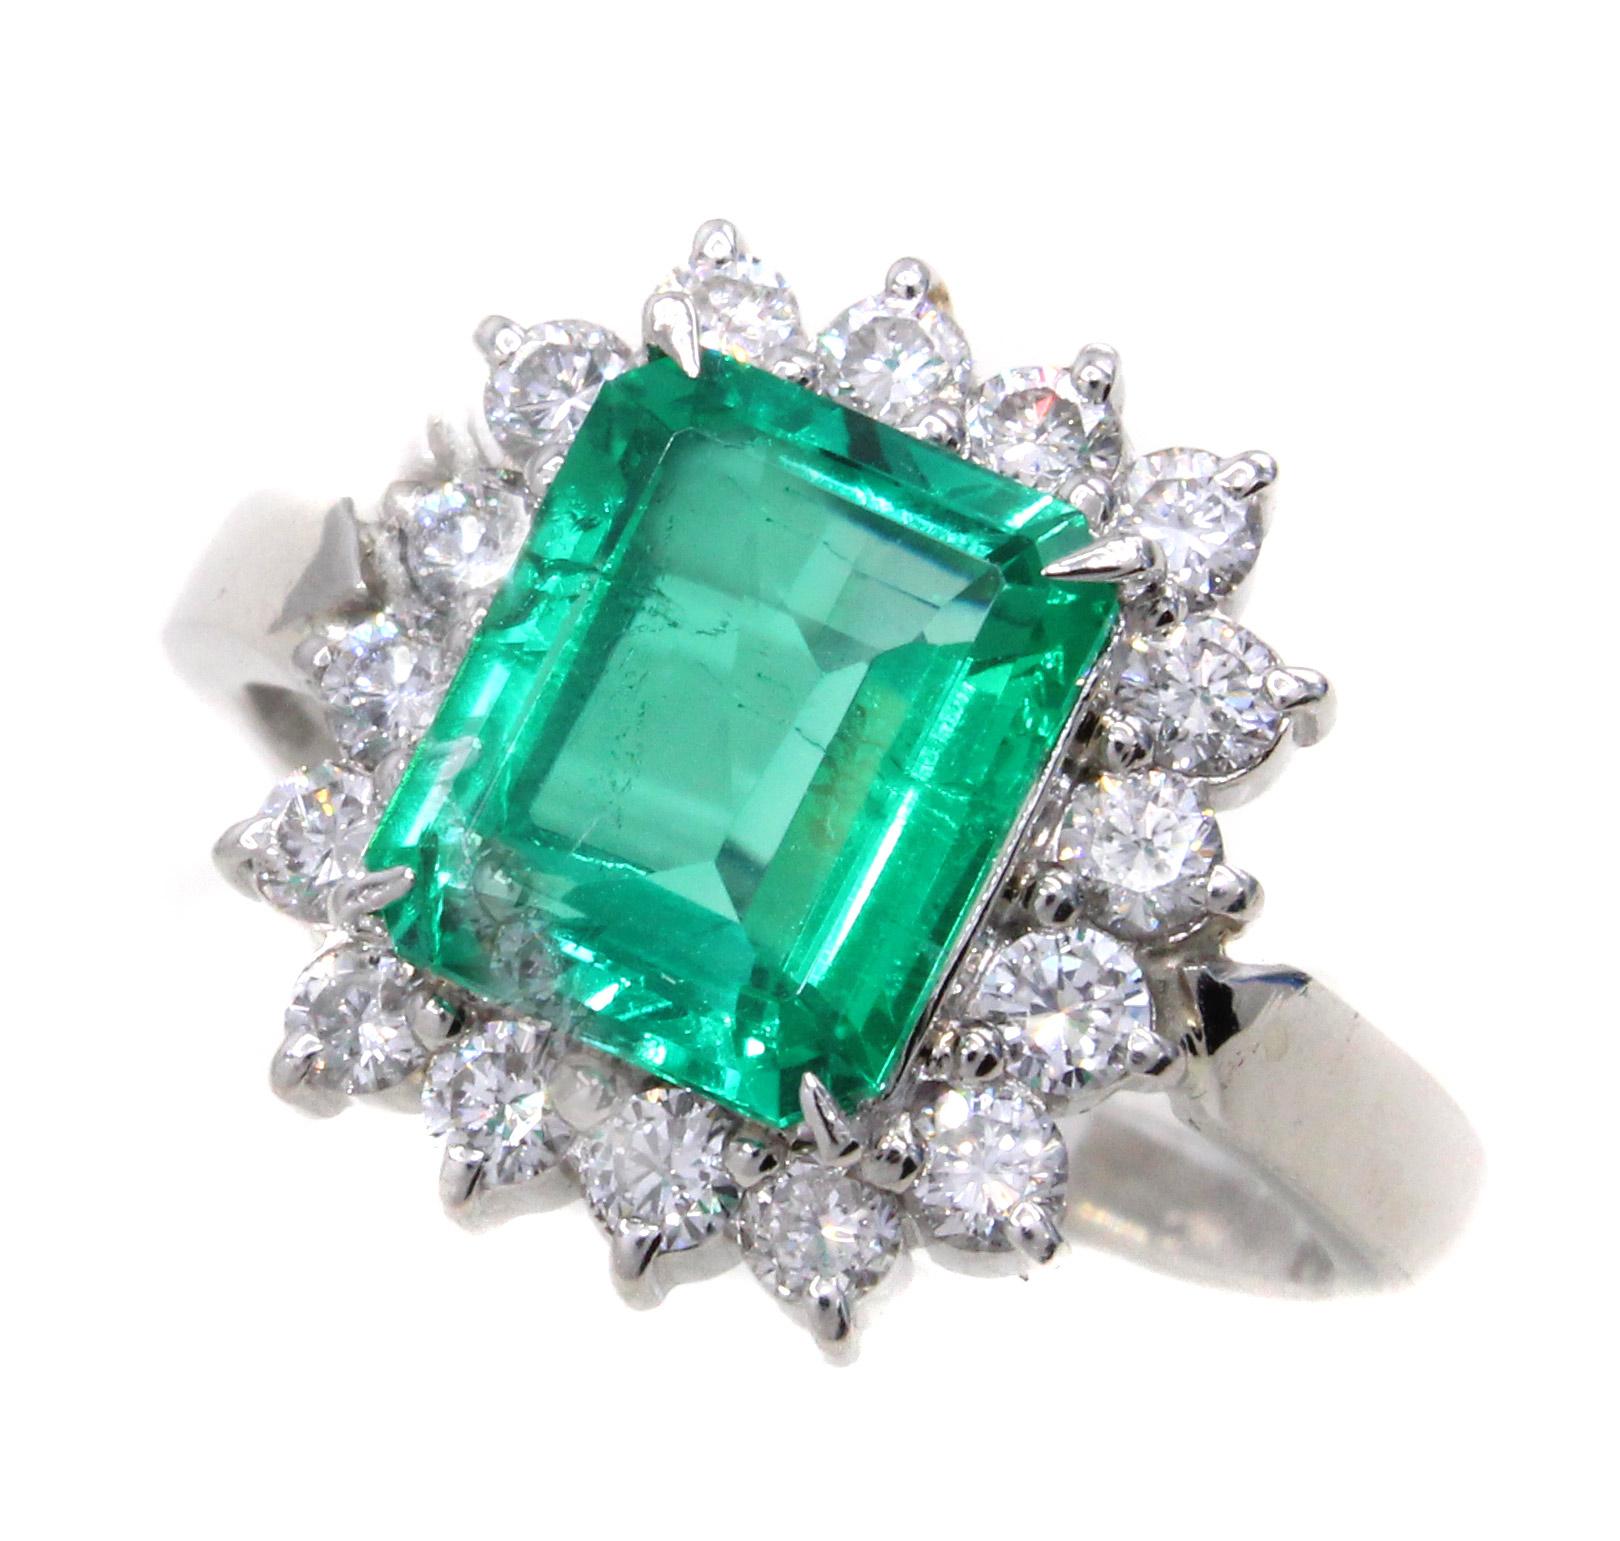 A beautifully laid out vivid green natural emerald weighing 1.99 carats is the center-piece of this impressive ring. The emerald is very clean and has very few natural inclusions. Well cut with perfect proportions this emerald shows a much larger